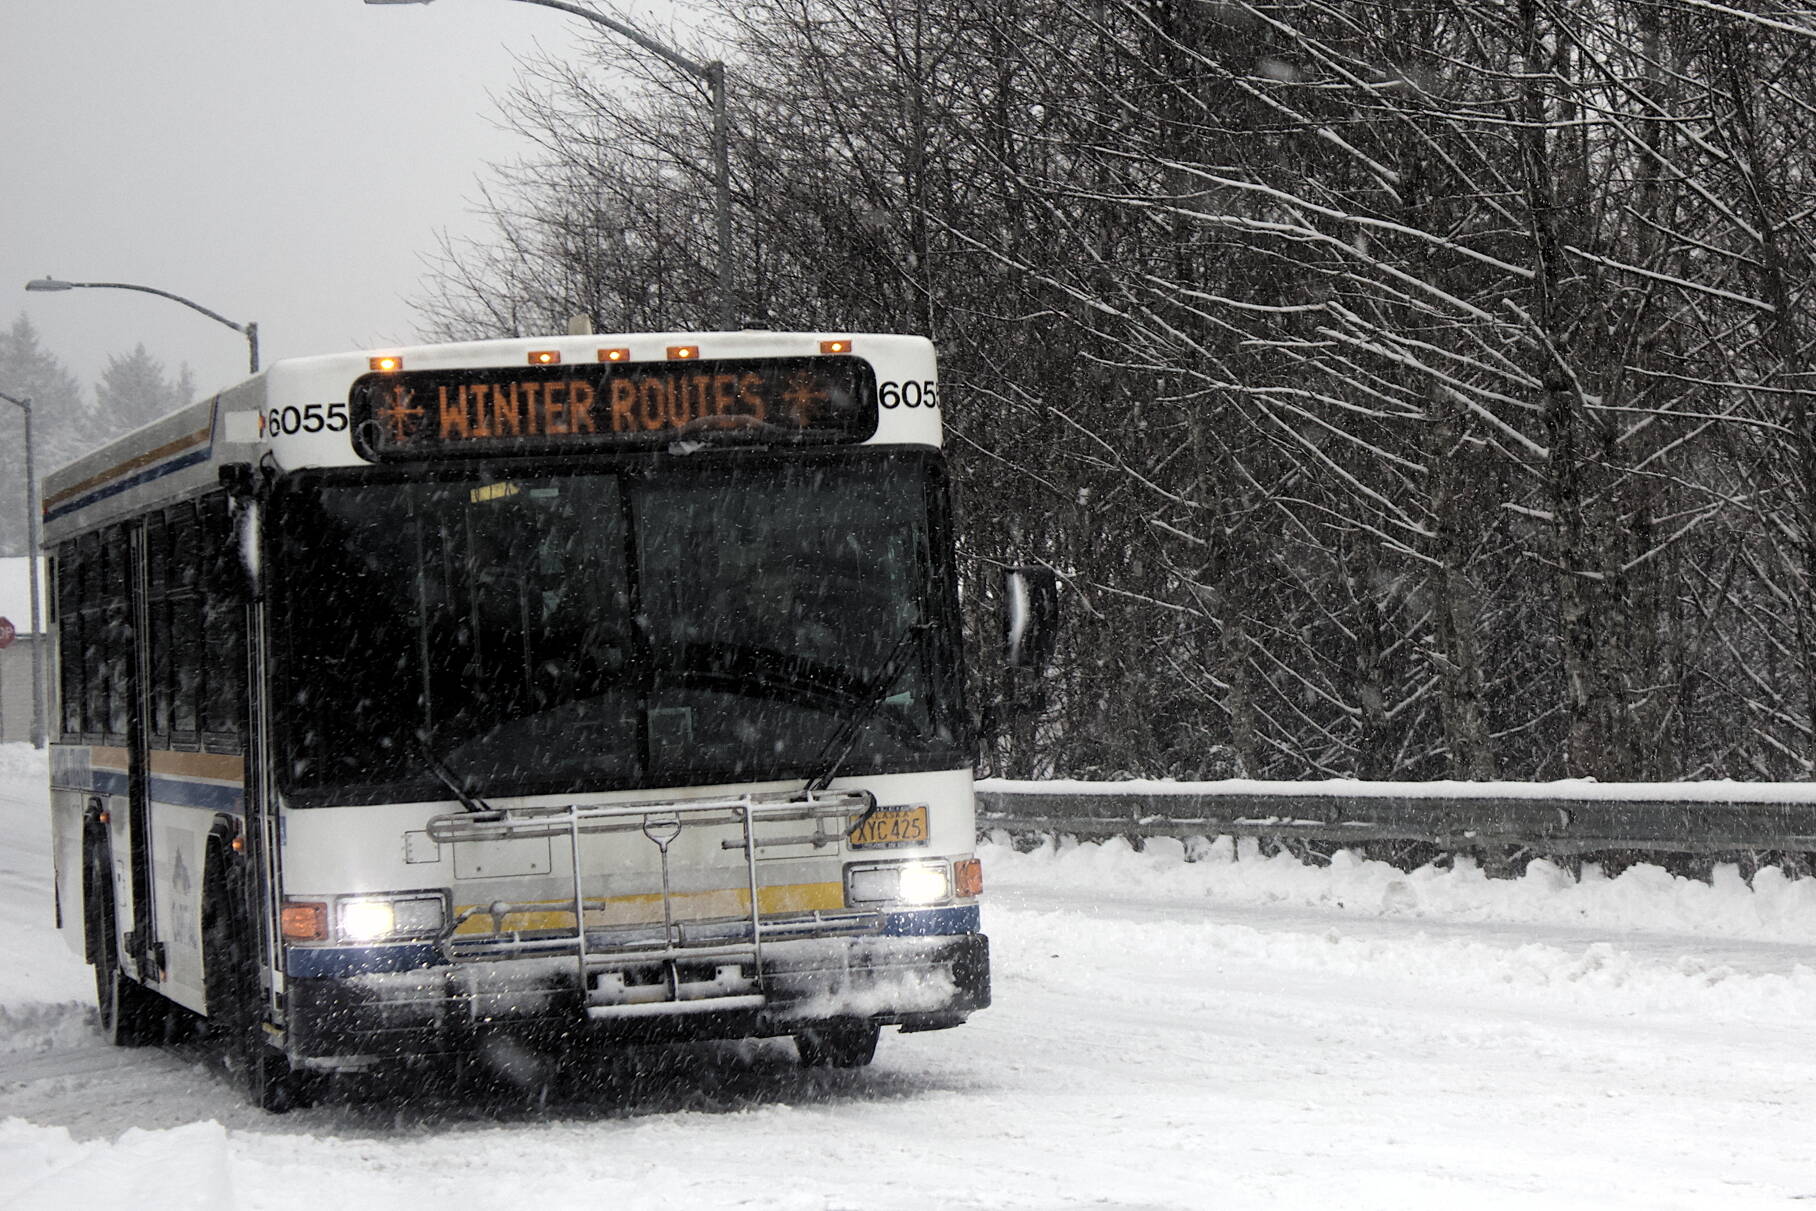 Mark Sabbatini / Juneau Empire 
A Capital Transit bus advises riders winter routes are in effect Thursday as the first heavy snowfall of the season limits service to some difficult-to-access streets.